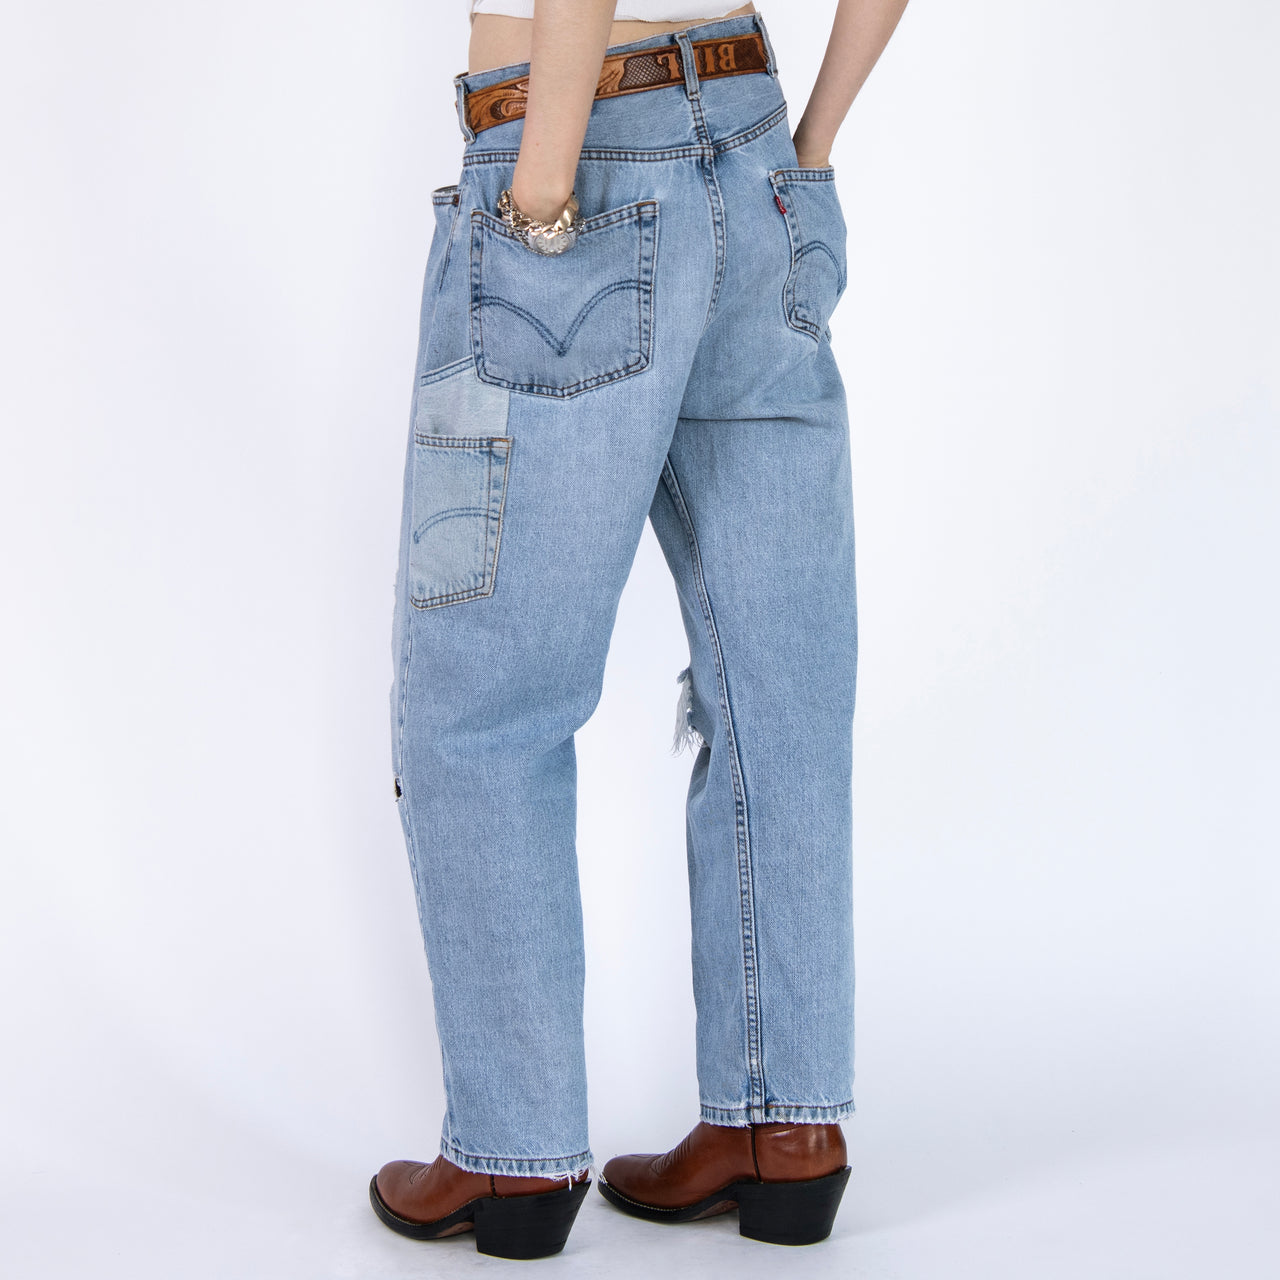 reconstructed cargo pocket jeans